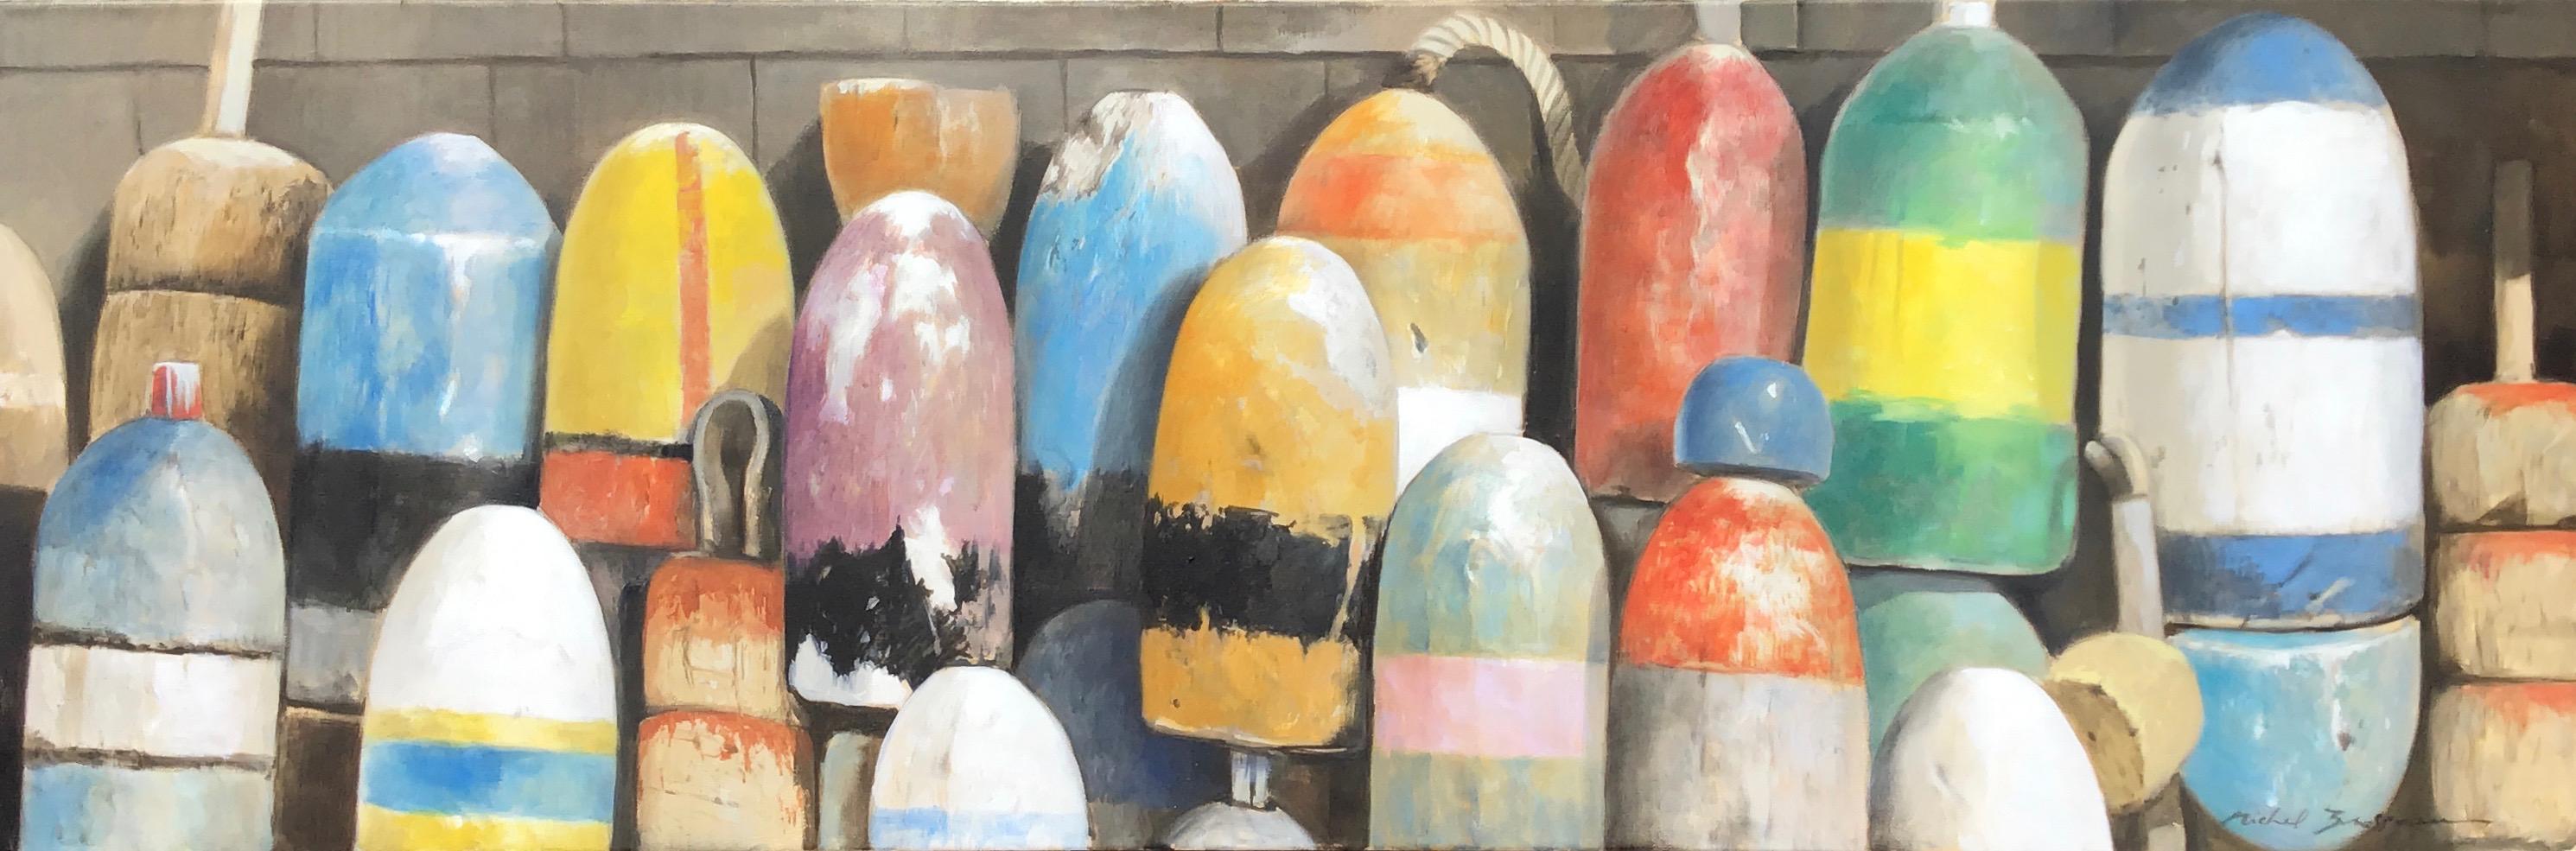 Michel Brosseau Still-Life Painting - "Gold and Blues" oil painting of colorful buoys against shingles